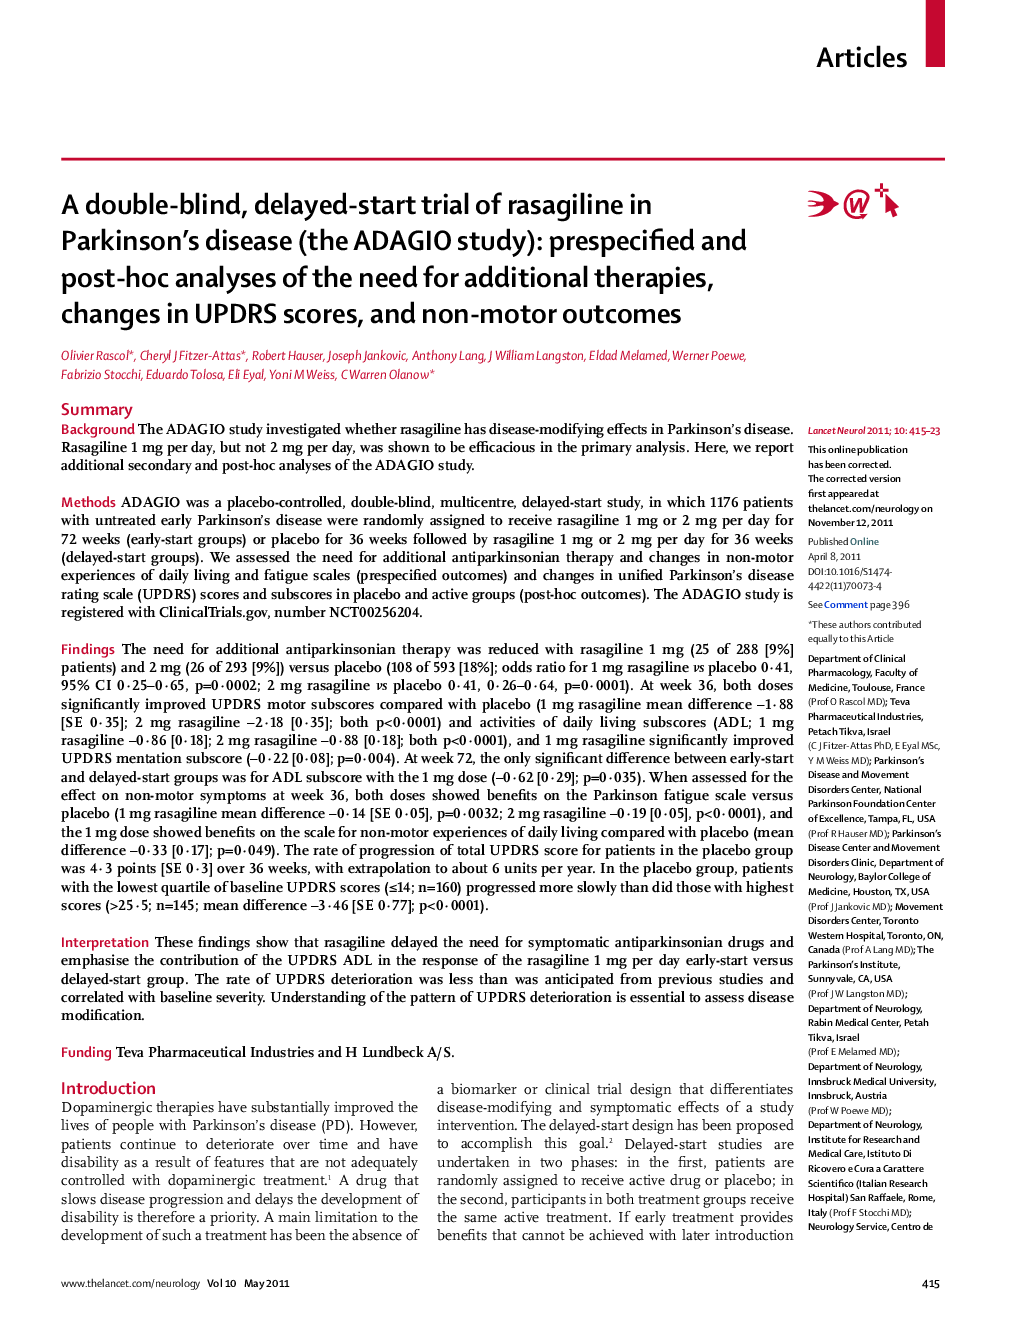 A double-blind, delayed-start trial of rasagiline in Parkinson's disease (the ADAGIO study): prespecified and post-hoc analyses of the need for additional therapies, changes in UPDRS scores, and non-motor outcomes